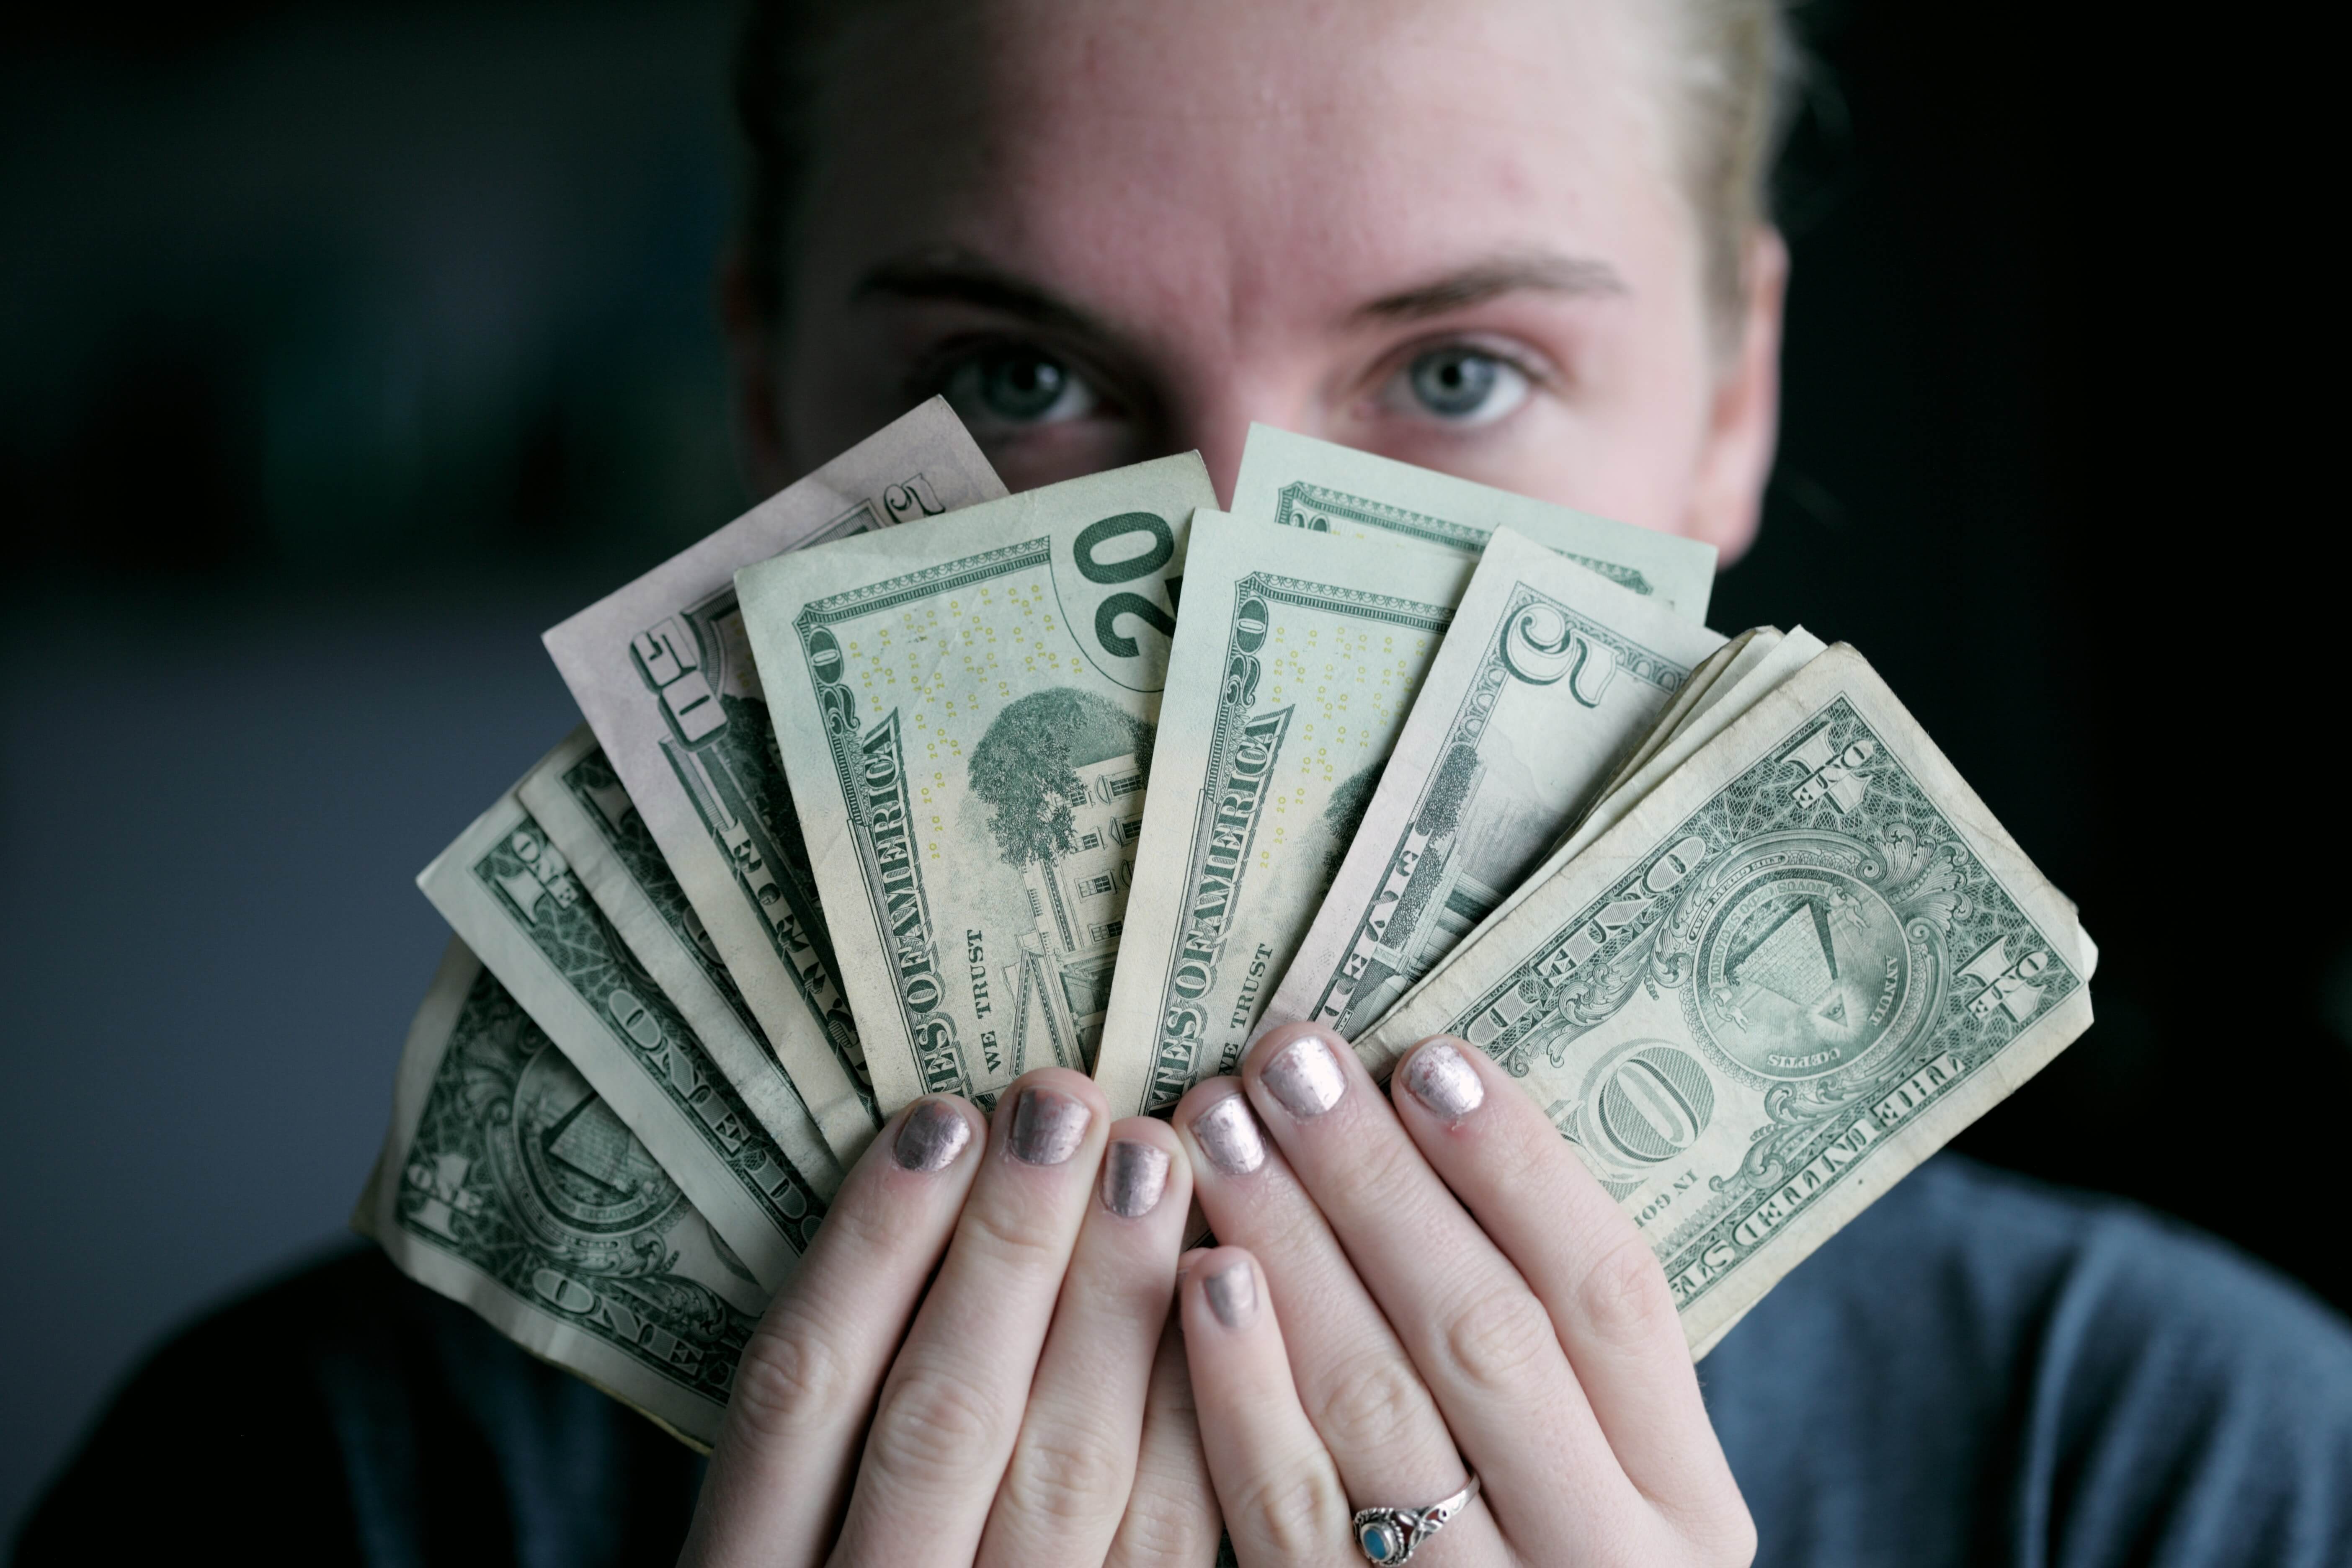 A white woman holding a fan of various US dollar bills in front of her face